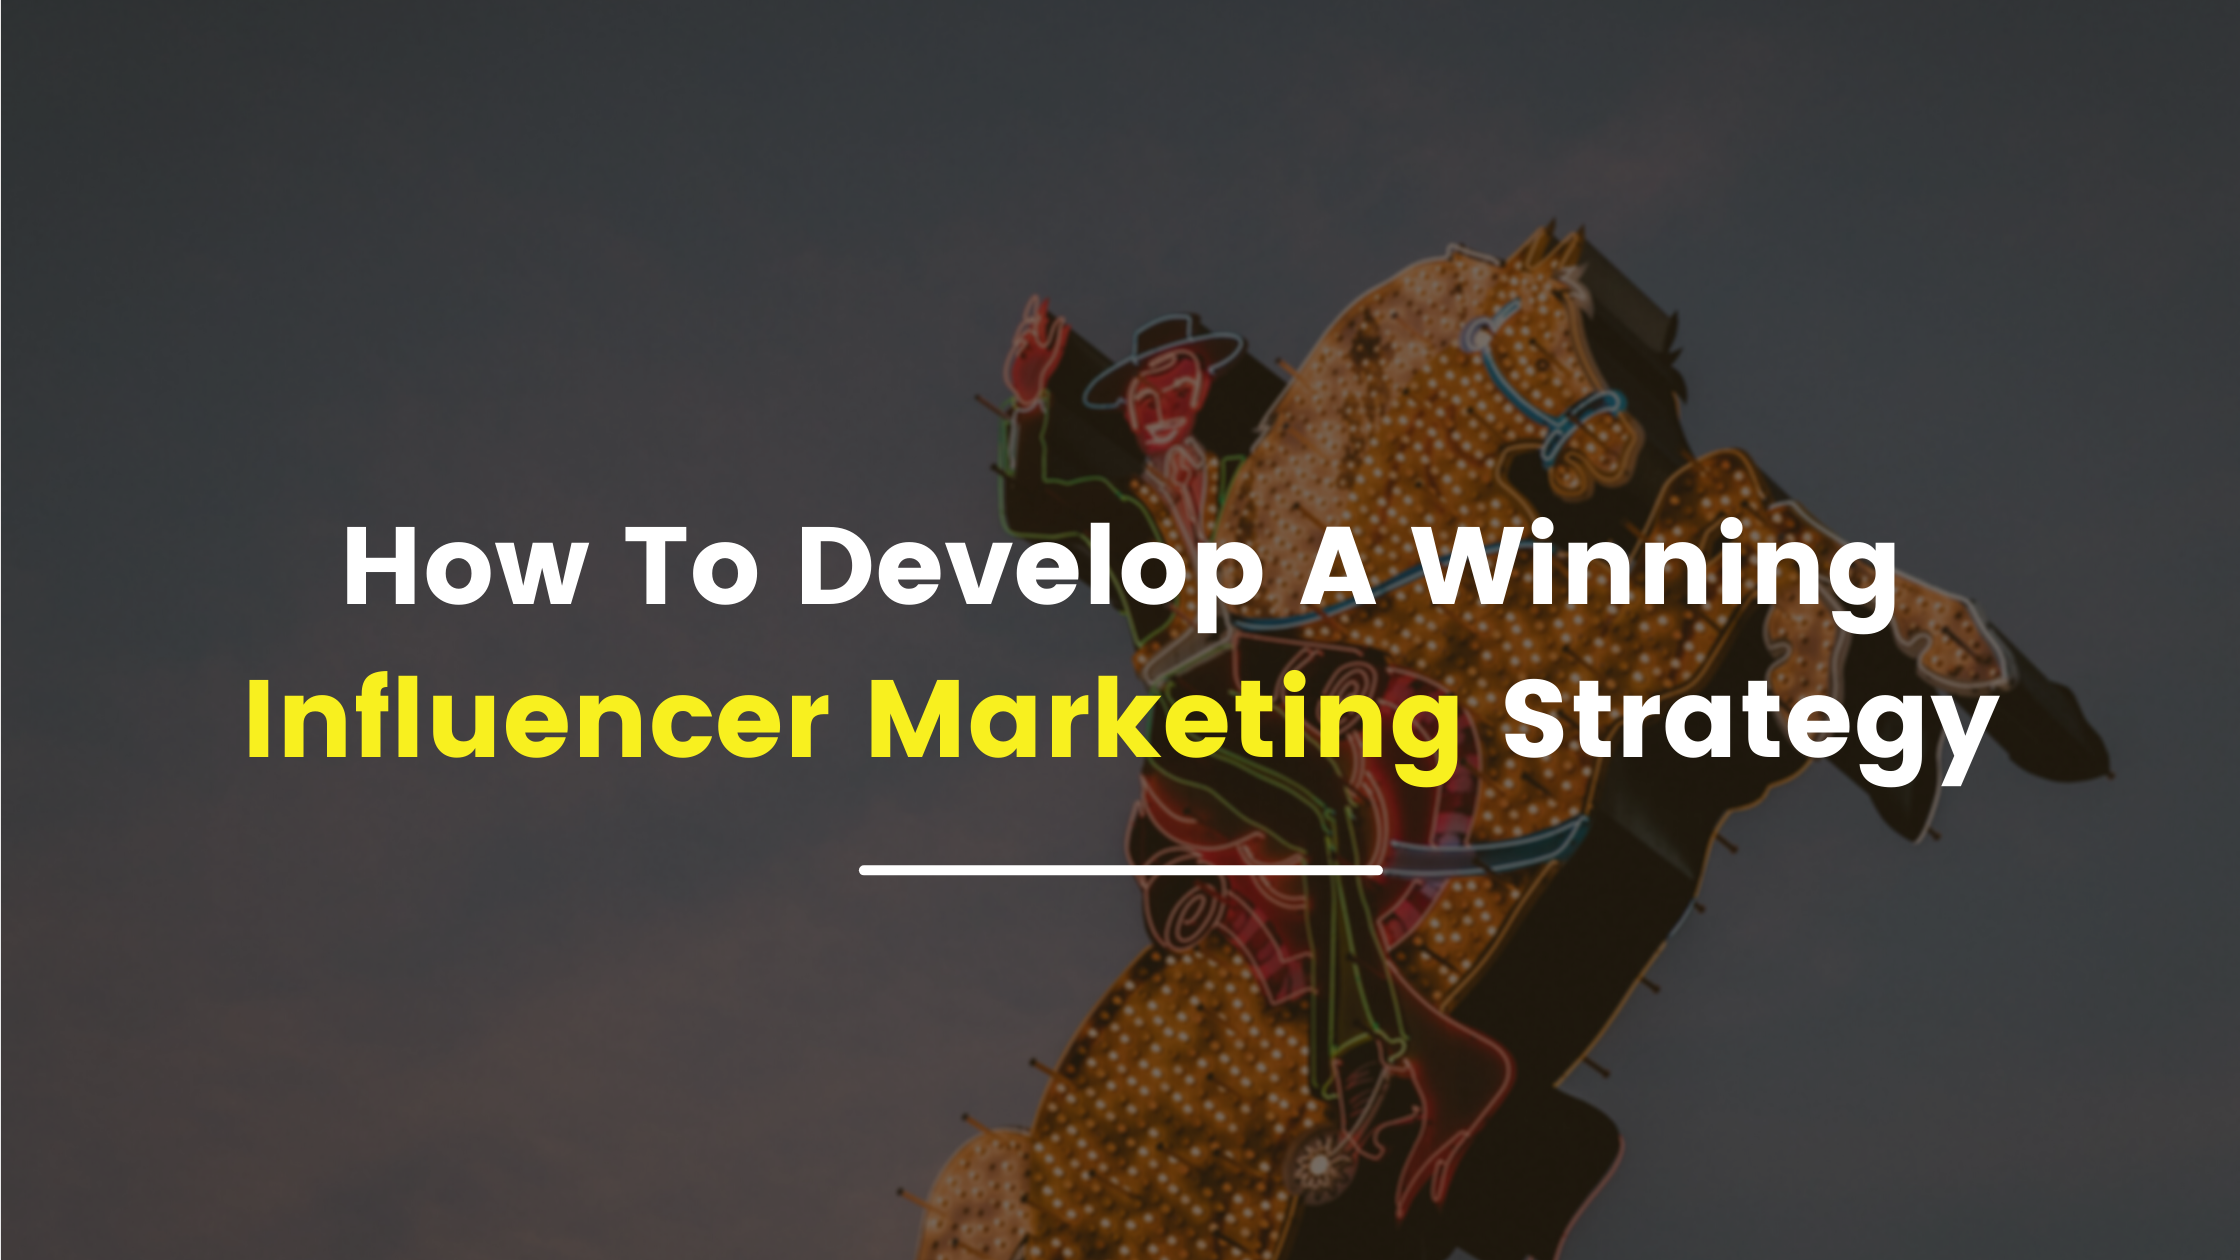 How To Develop A Winning Influencer Marketing Strategy